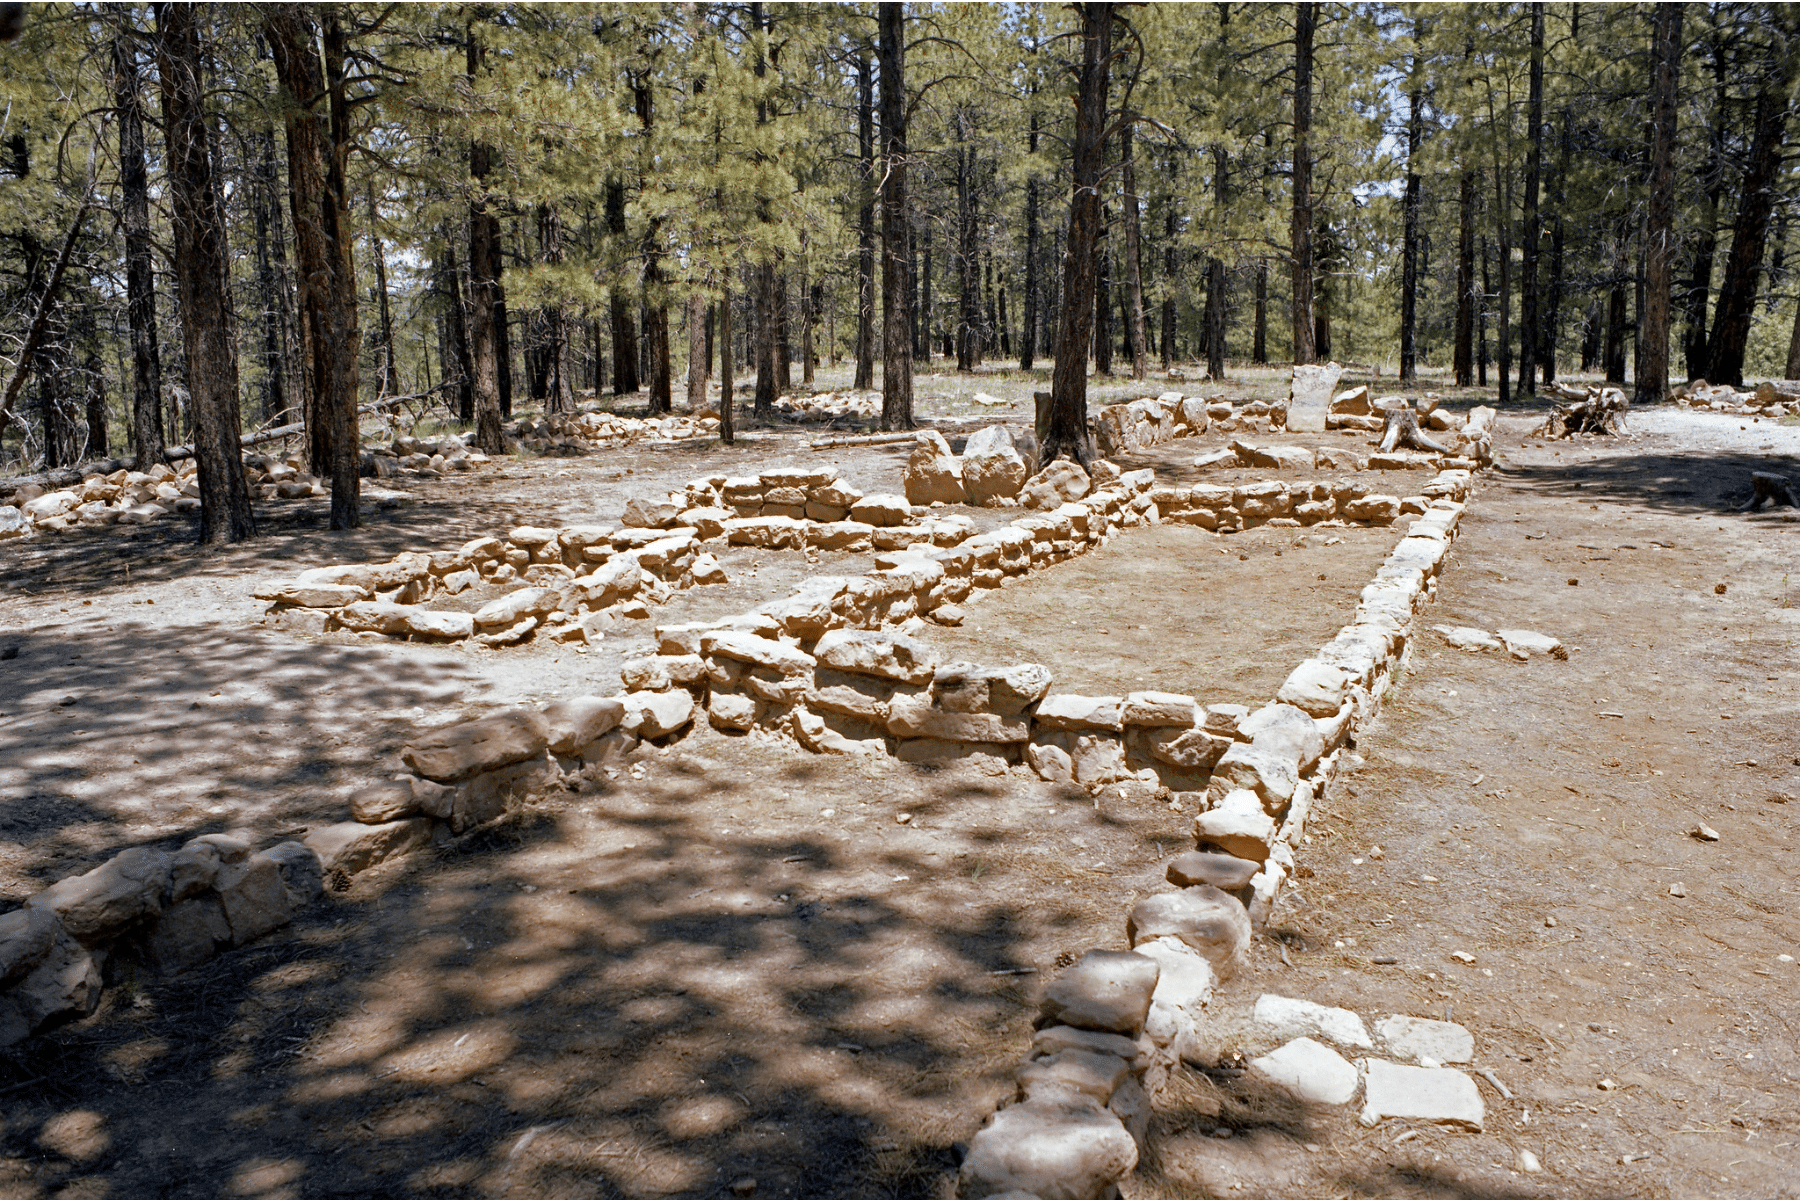 Rocks form the outline of homes from 900 years ago in a dense forest at Walhalla Ruins near the North Rim of the Grand Canyon.